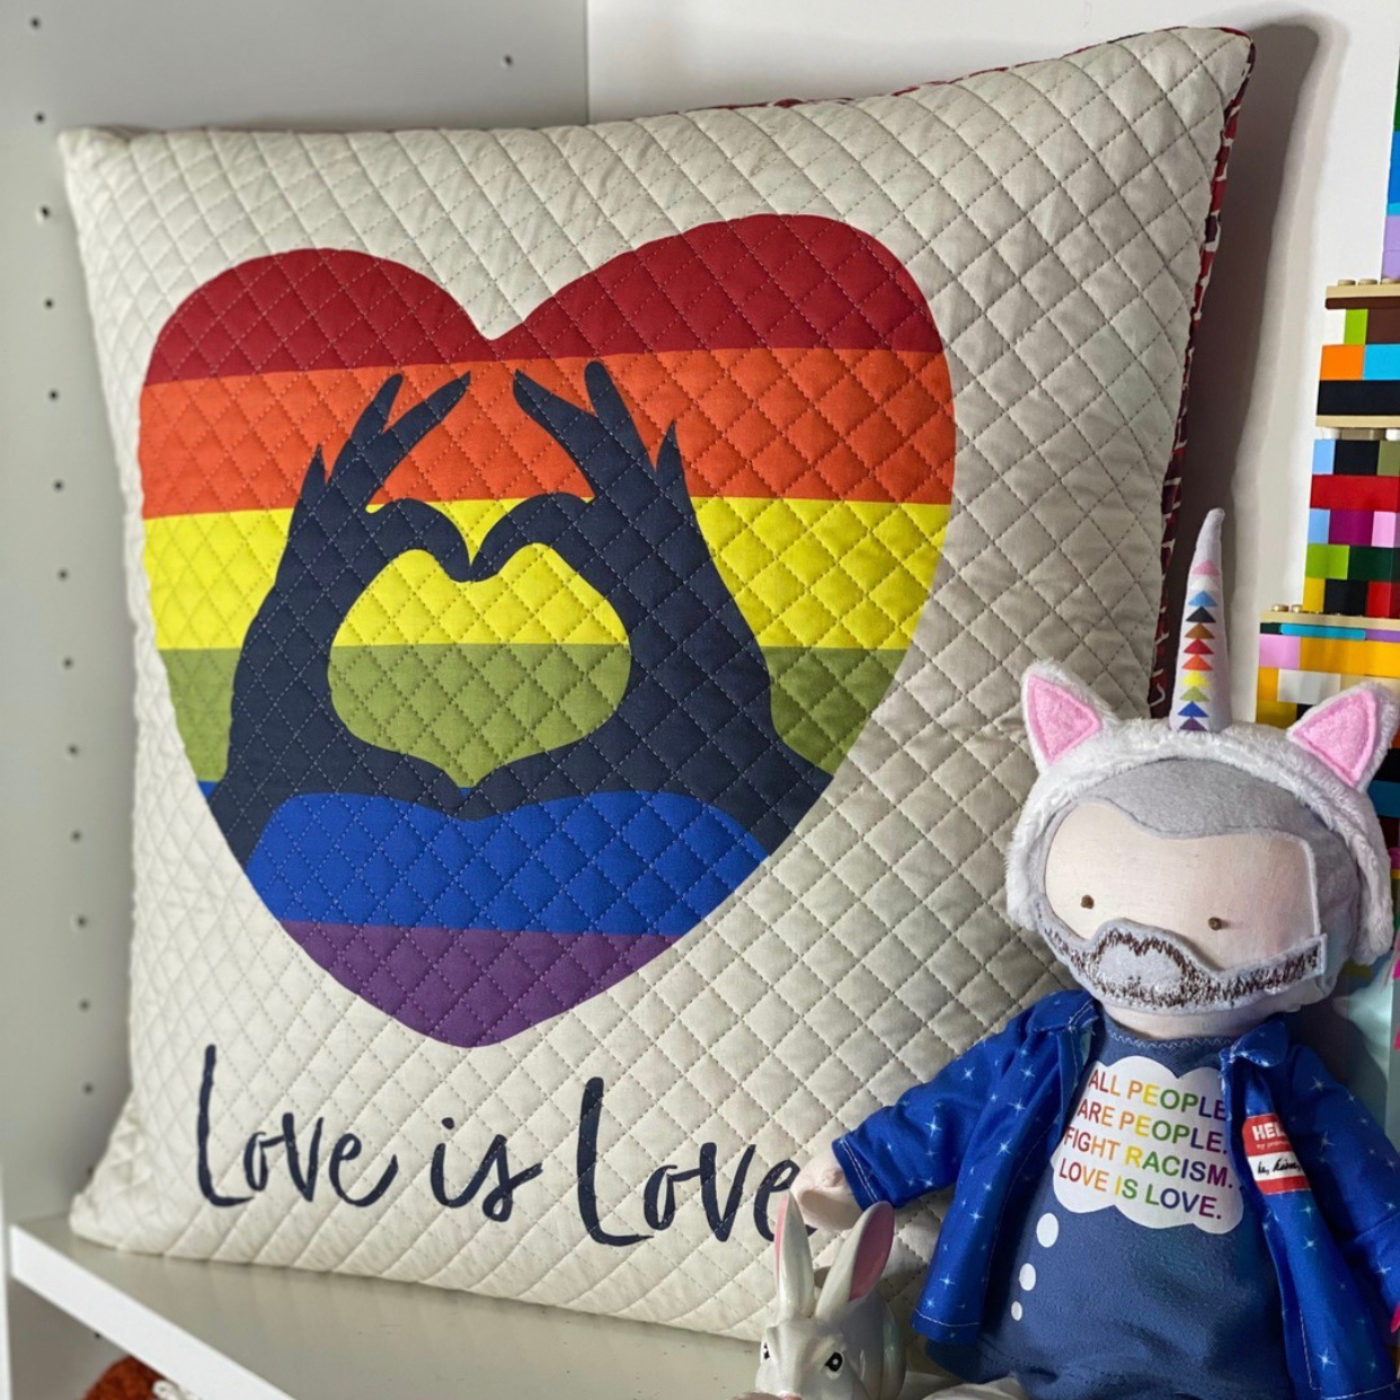 A cream quilted pillow with a rainbow striped heart in the middle, showing two black hands held together forming the shape of a heart, and the words “Love is Love” in black cursive font underneath, is on a white bookshelf. Next to the pillow is a small gray plastic rabbit and a small sofitie of a person with gray hair and a gray beard, wearing a blue hoodie and a blue shirt that says “All people are people. Fight racism. Love is love.” in rainbow letters, and a headband with pink cat ears and a rainbow unicorn horn.